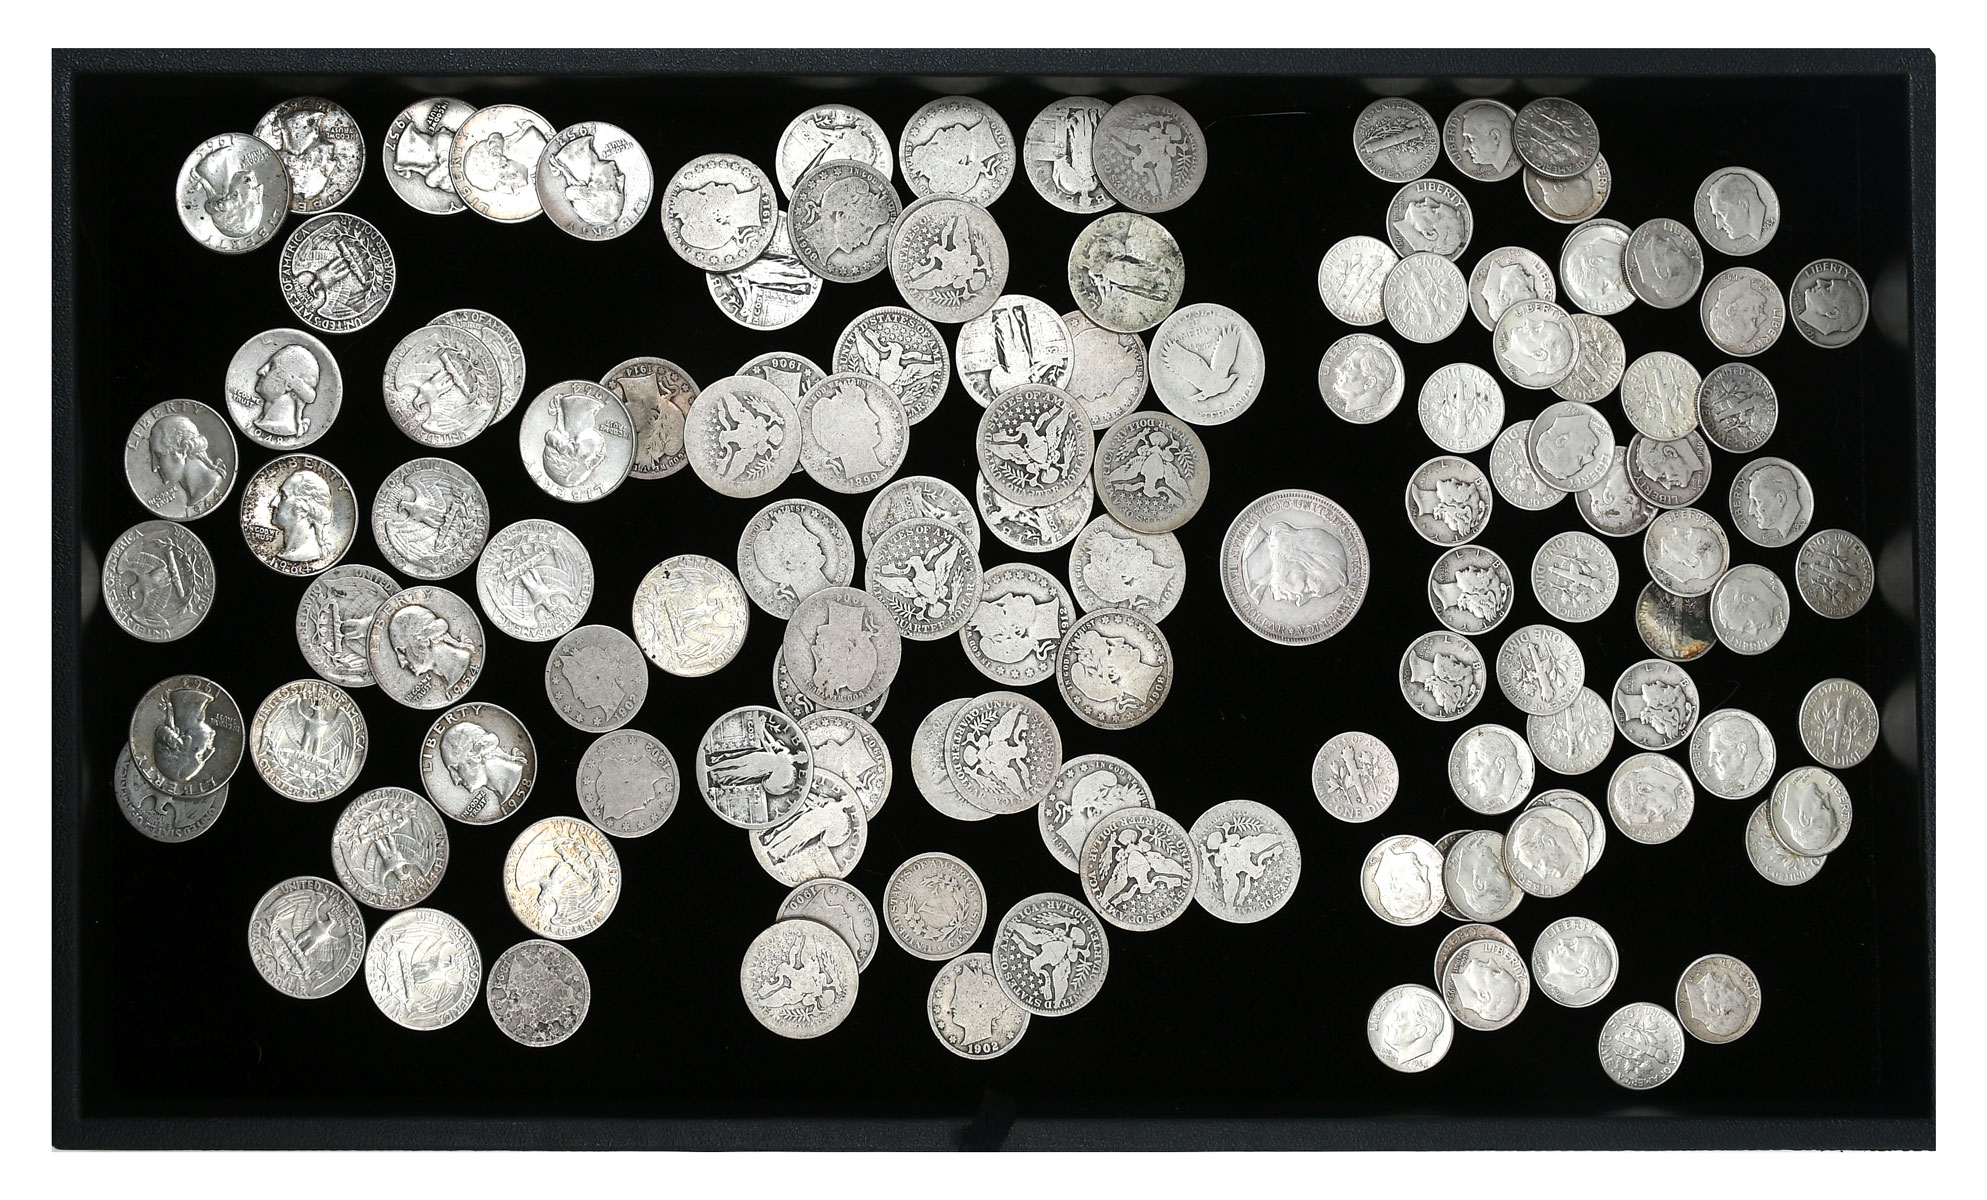 125 PC. UNITED STATES SILVER COIN COLLECTION: